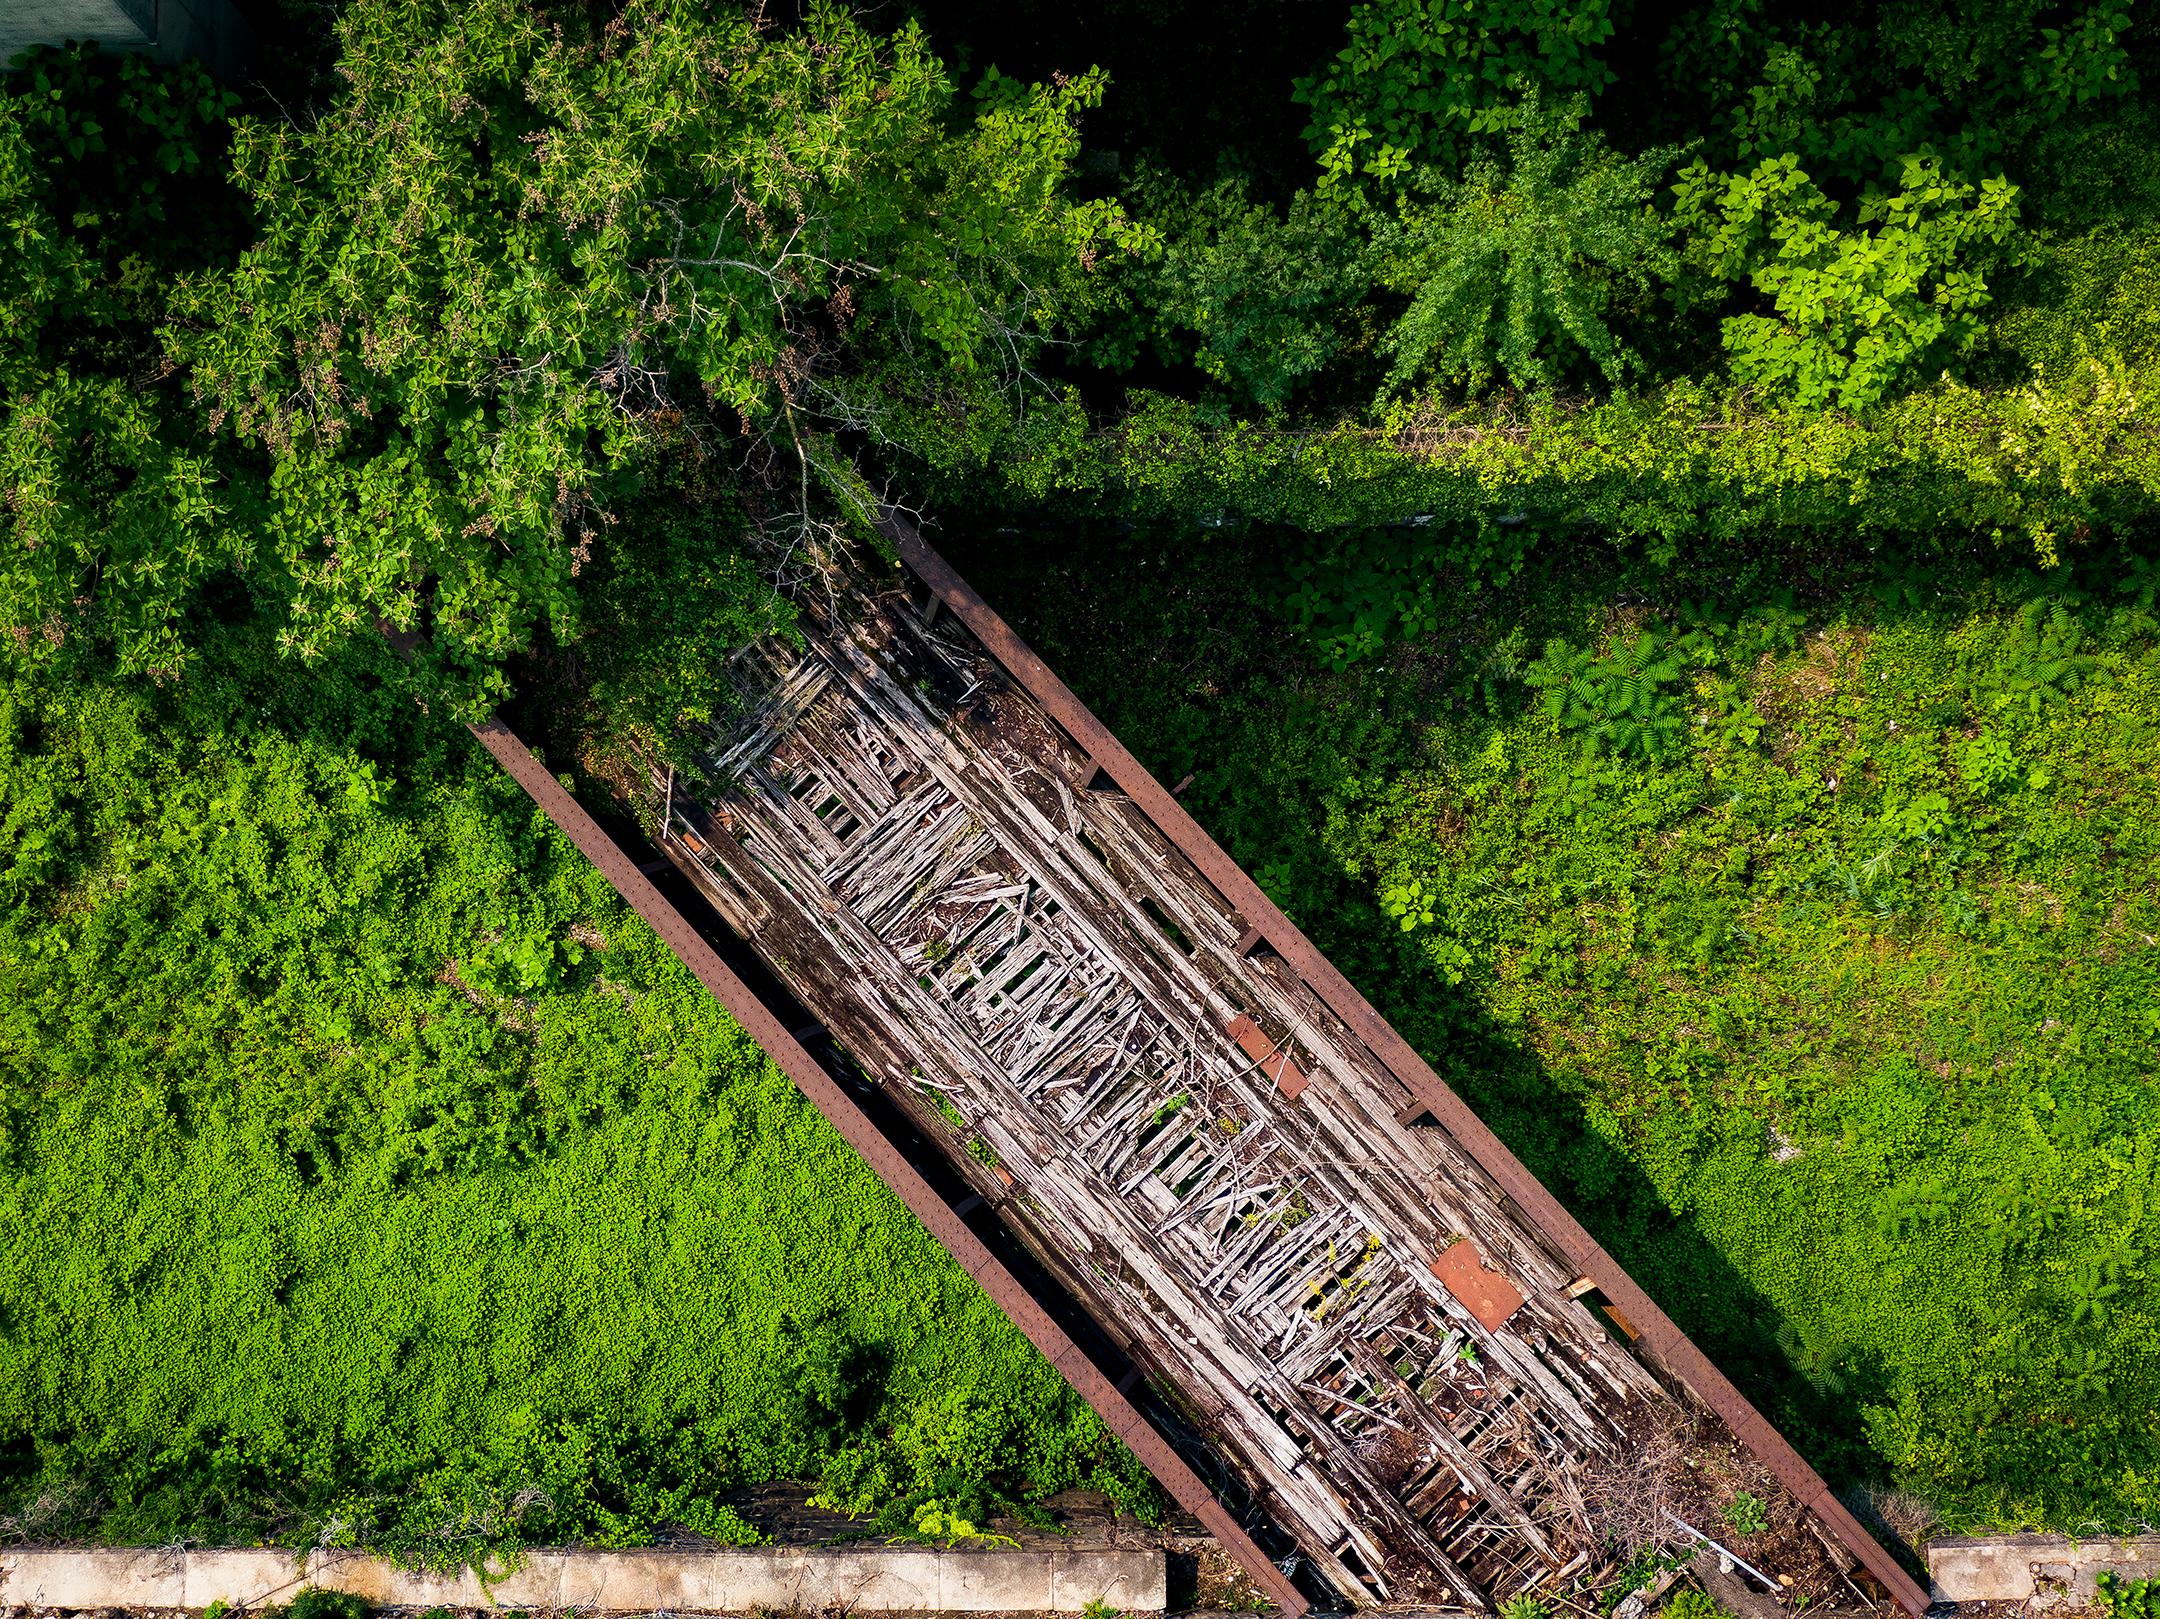 Photo courtesy of Ryan Brandenberg. Overhead drone shot of the rail track, with vibrant greenery sourounding it.